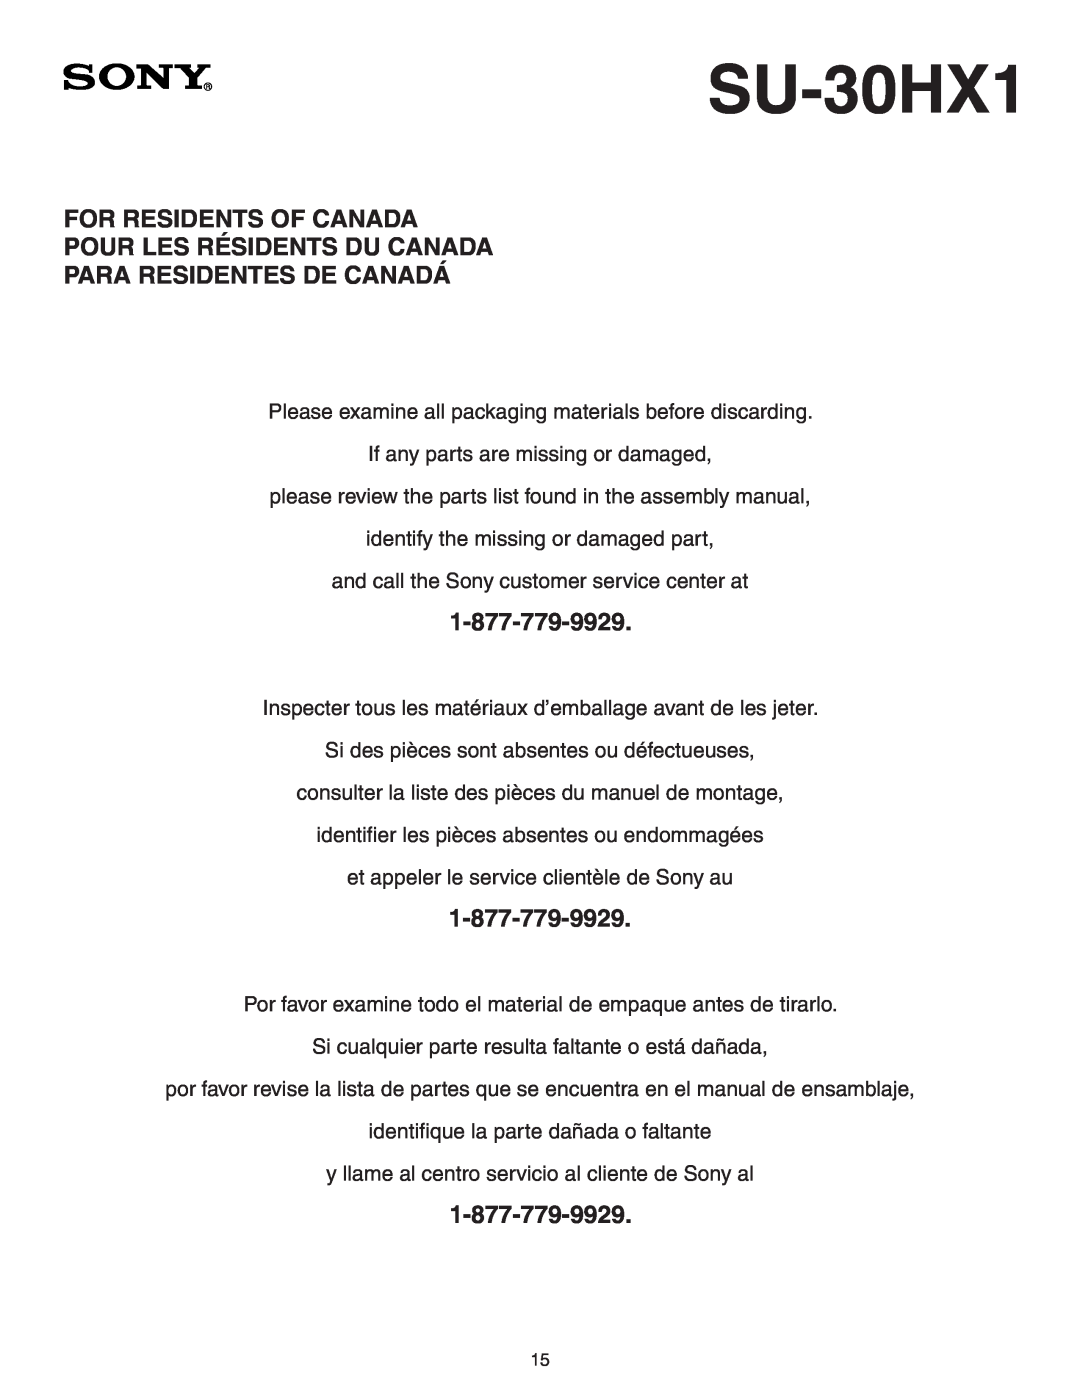 Sony SU-30HX1 manual For Residents Of Canada Pour Les Résidents Du Canada, Para Residentes De Canadá 